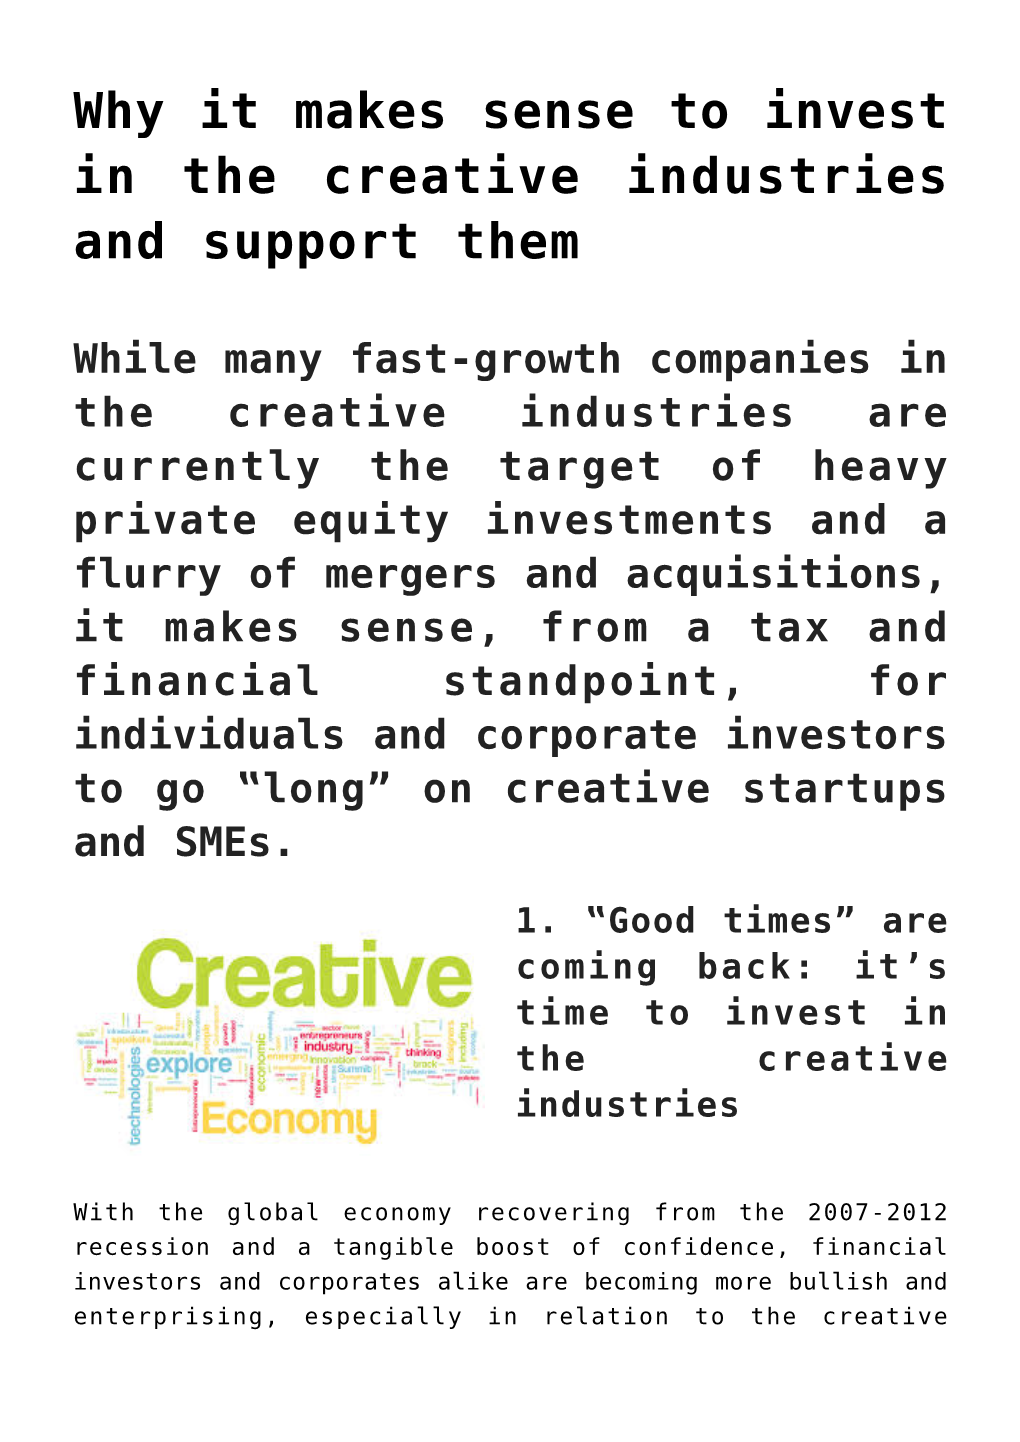 Why It Makes Sense to Invest in the Creative Industries and Support Them